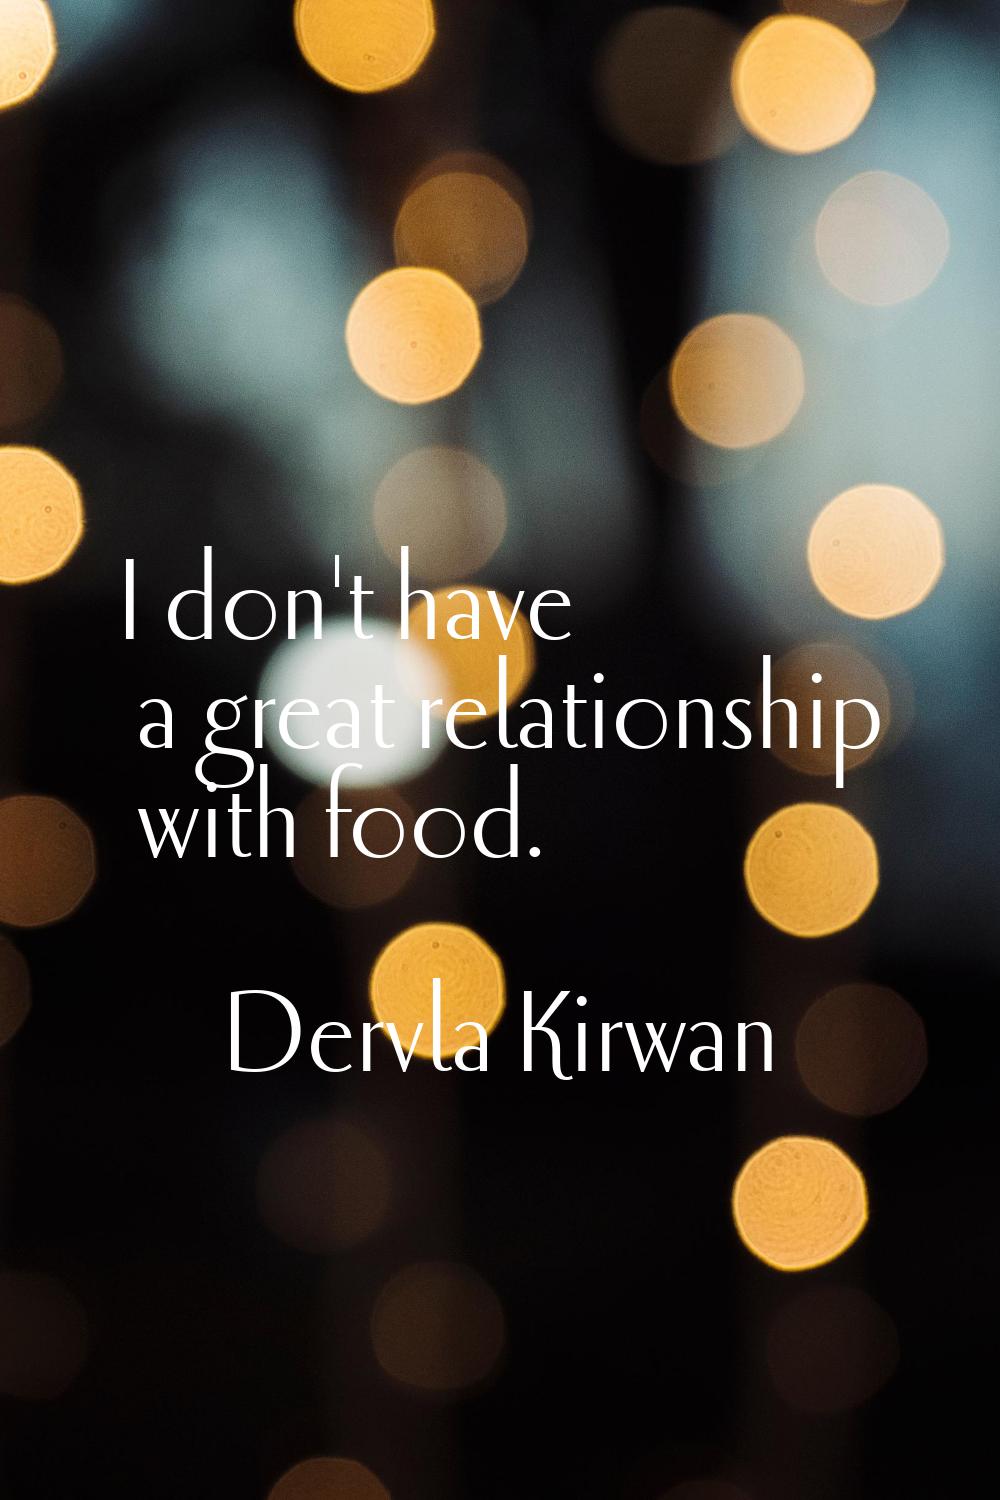 I don't have a great relationship with food.